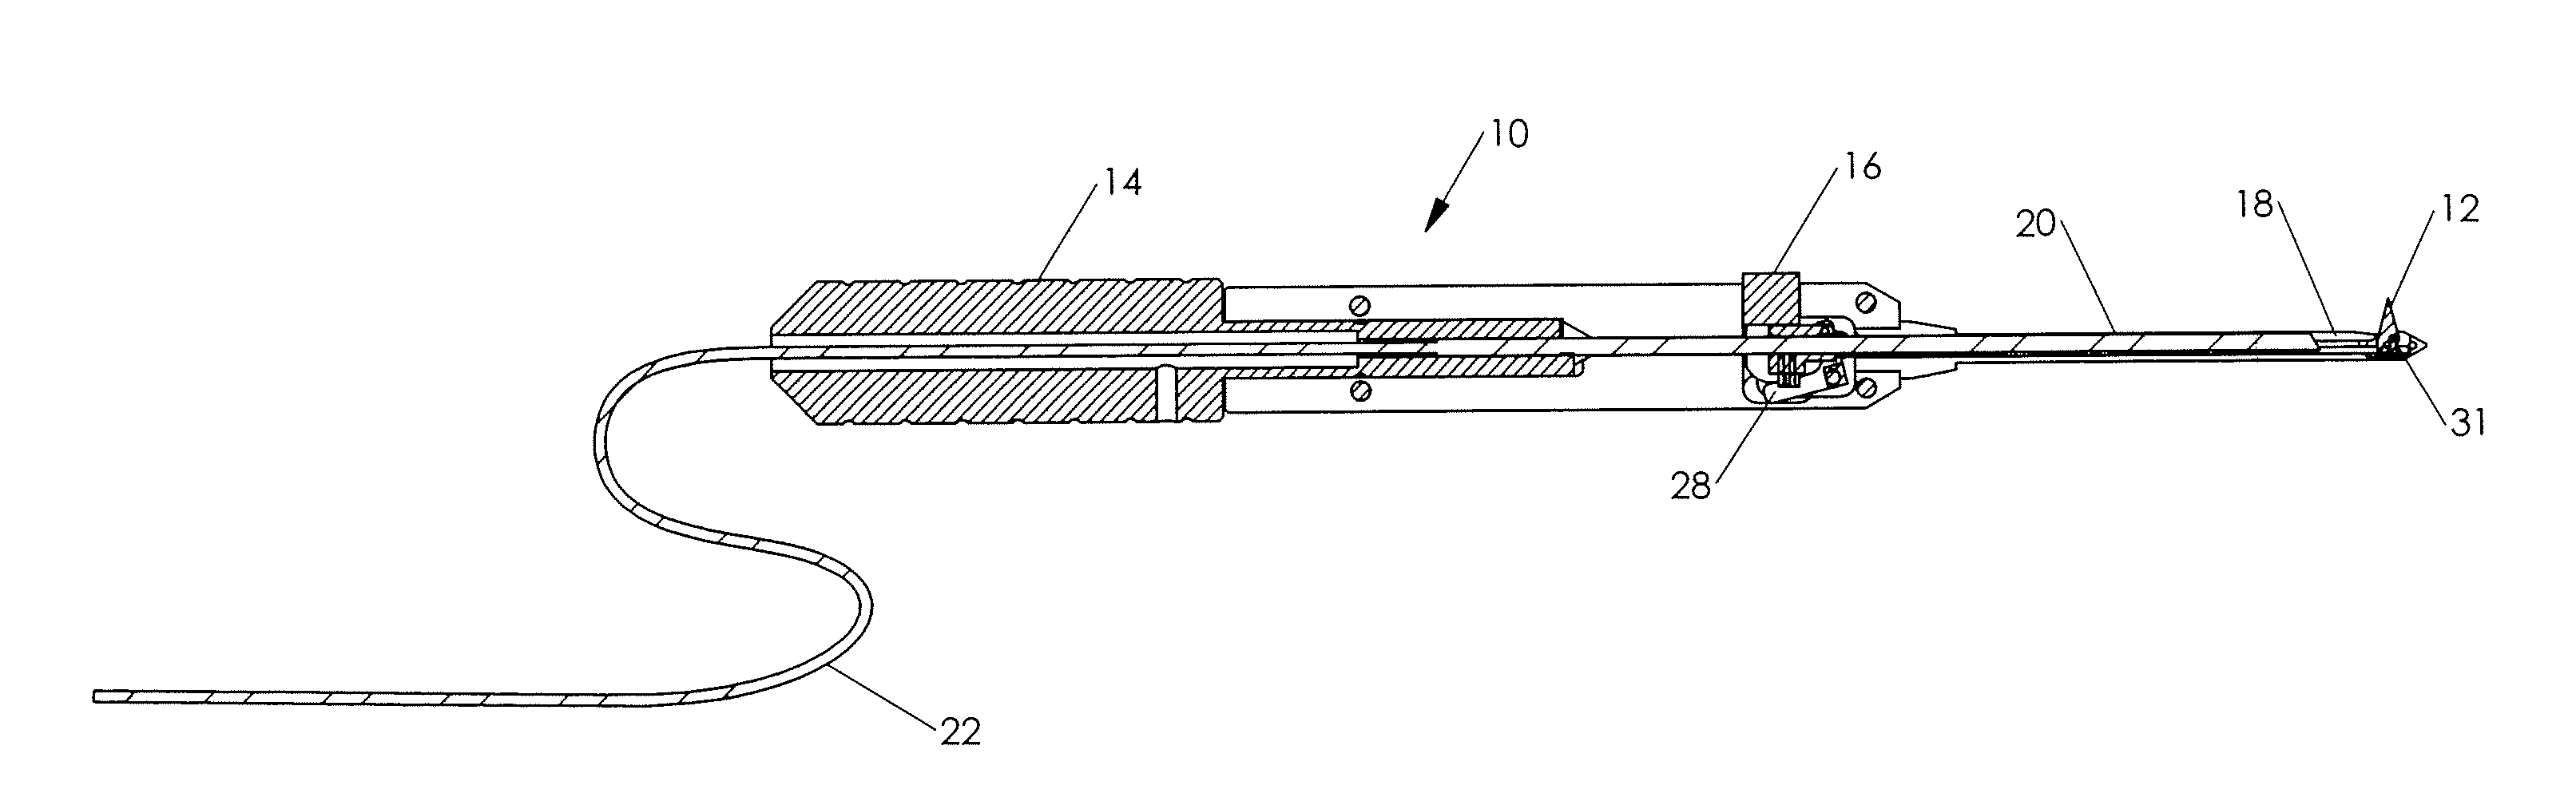 Endoscopic surgical tool with retractable blade for carpal tunnel release